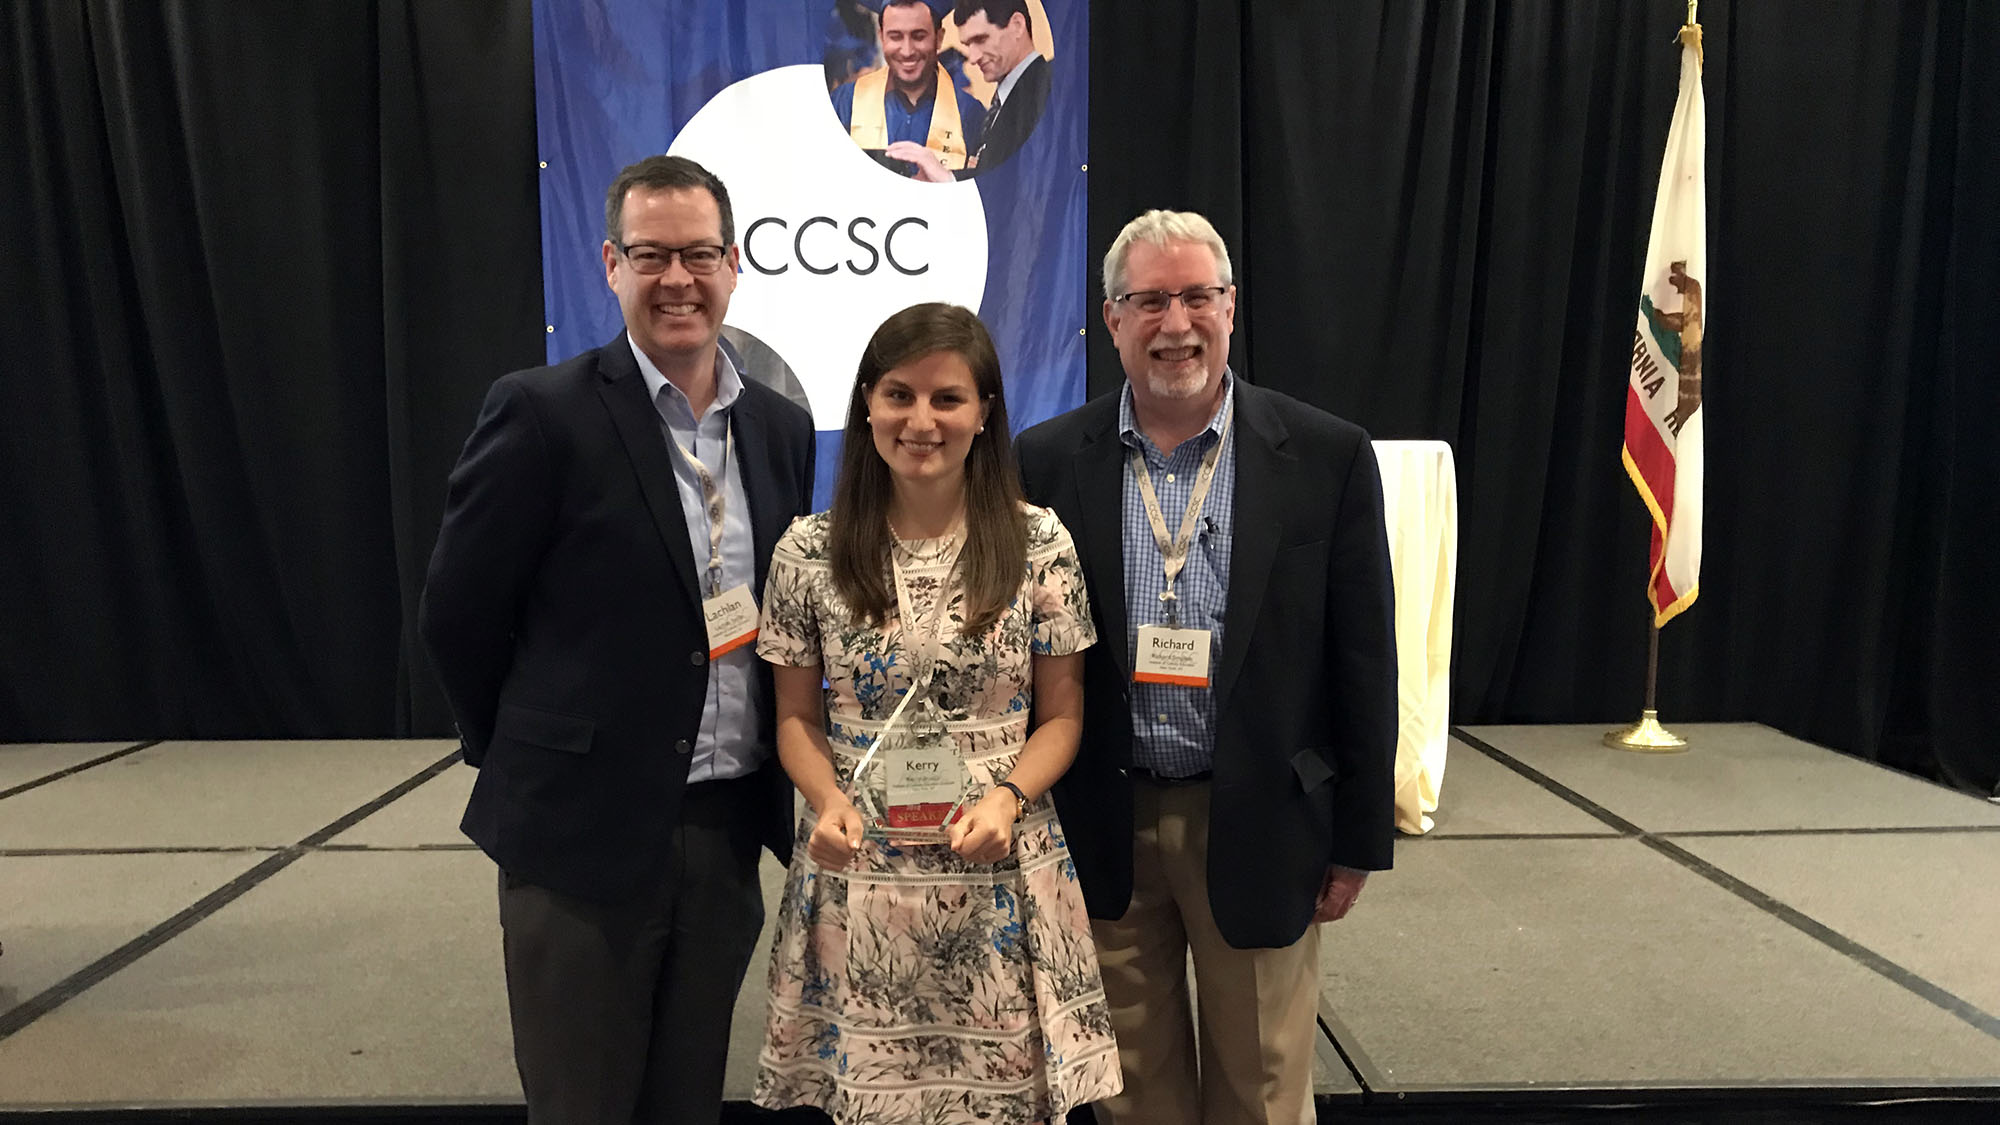 ICE Los Angeles Campus President Lachlan Sands and VP of Education Richard Simpson congratulate Kerry Brodie on her ACCSC Outstanding Graduate Award.